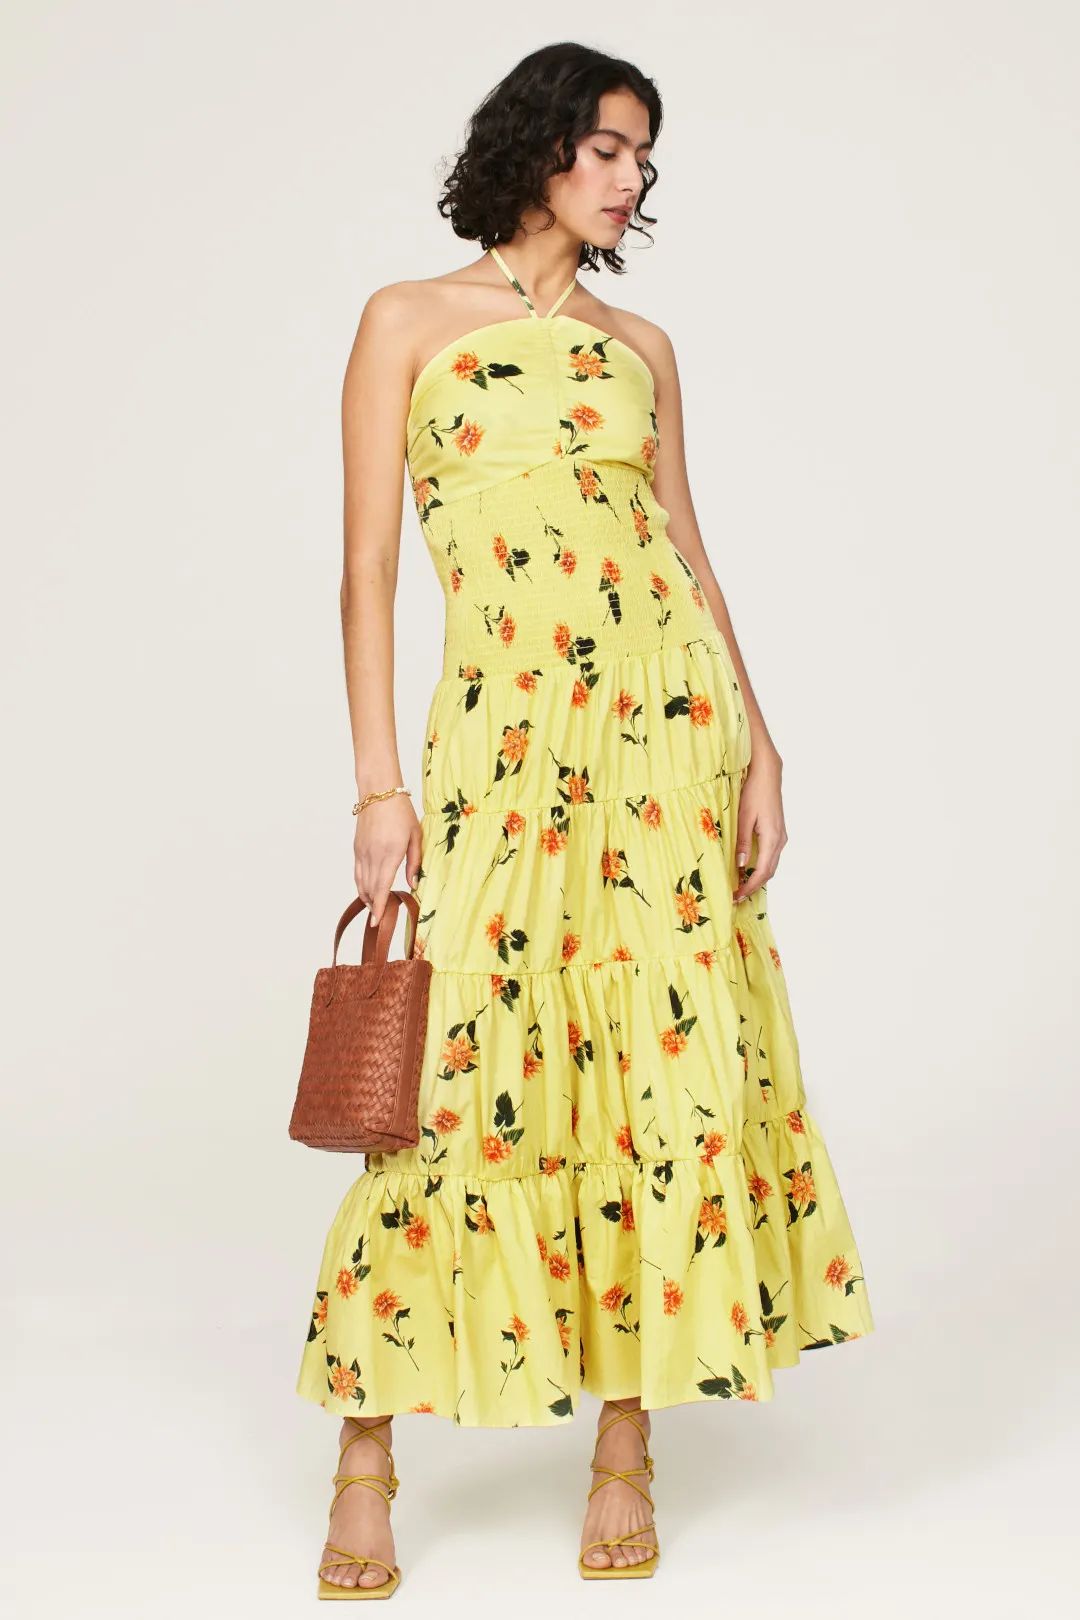 Yellow Floral Dress | Rent the Runway